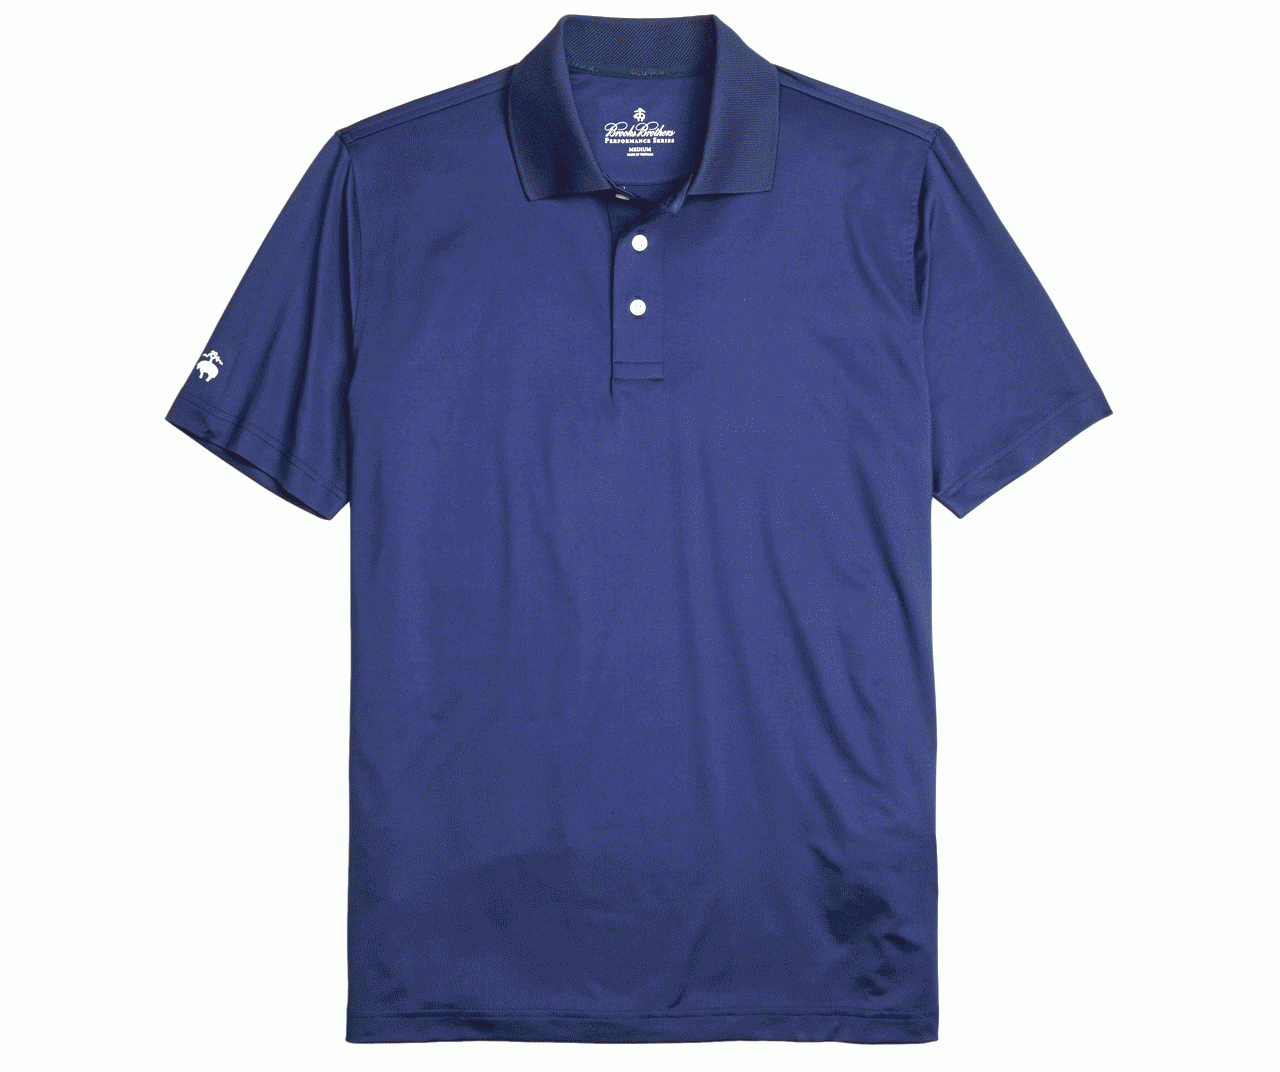 Peak Performance Our Performance Series Polos are designed for optimal comfort (and style).